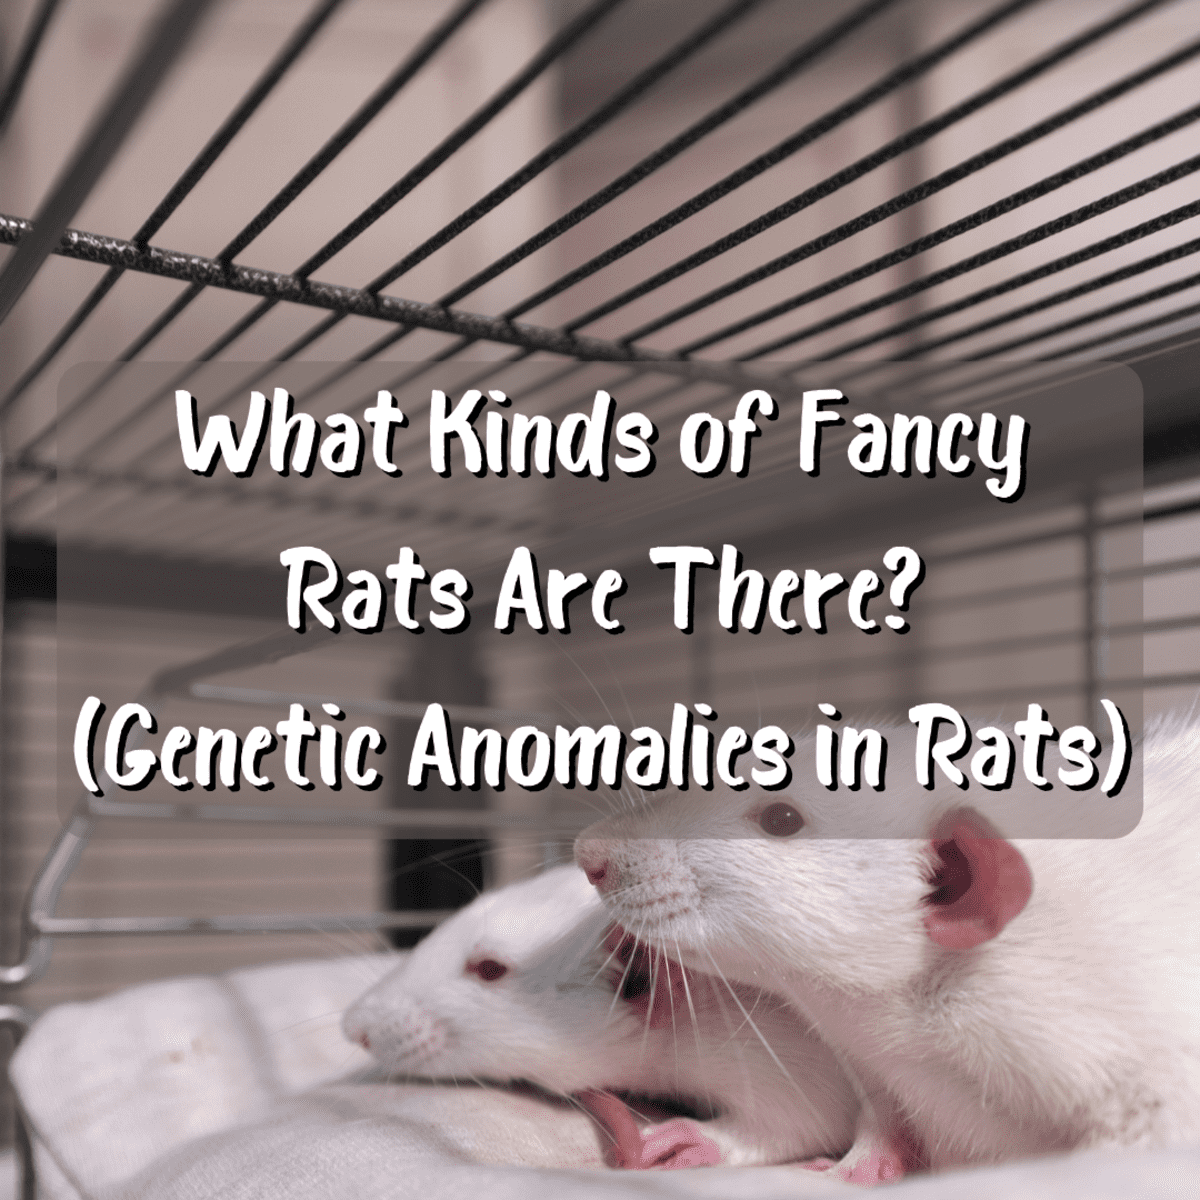 What Kinds of Fancy Rats Are There? (Genetic Anomalies in Rats) - PetHelpful